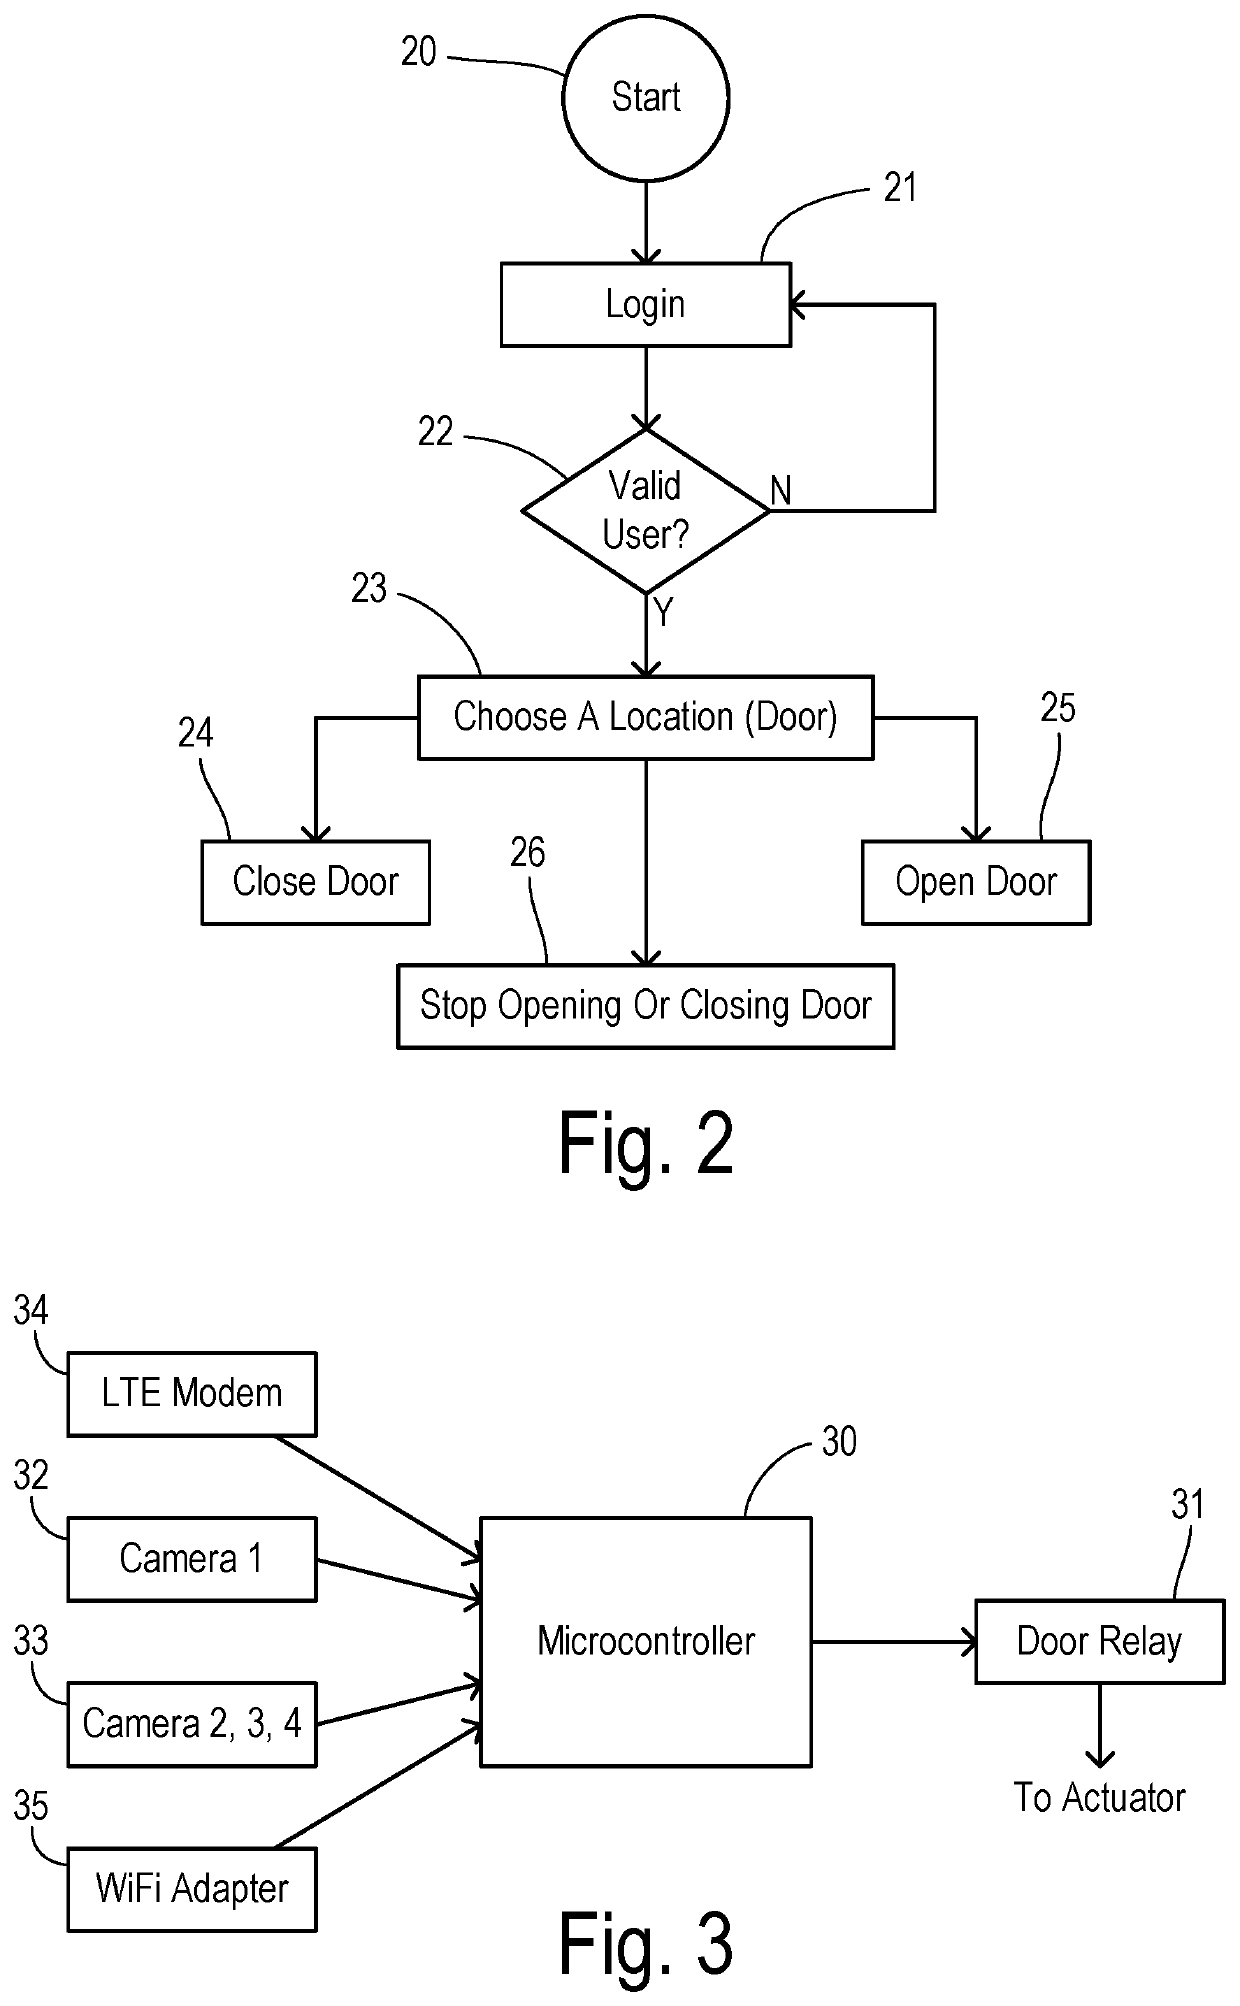 Internet-based remote control and monitoring system for commercial doors using mobile devices